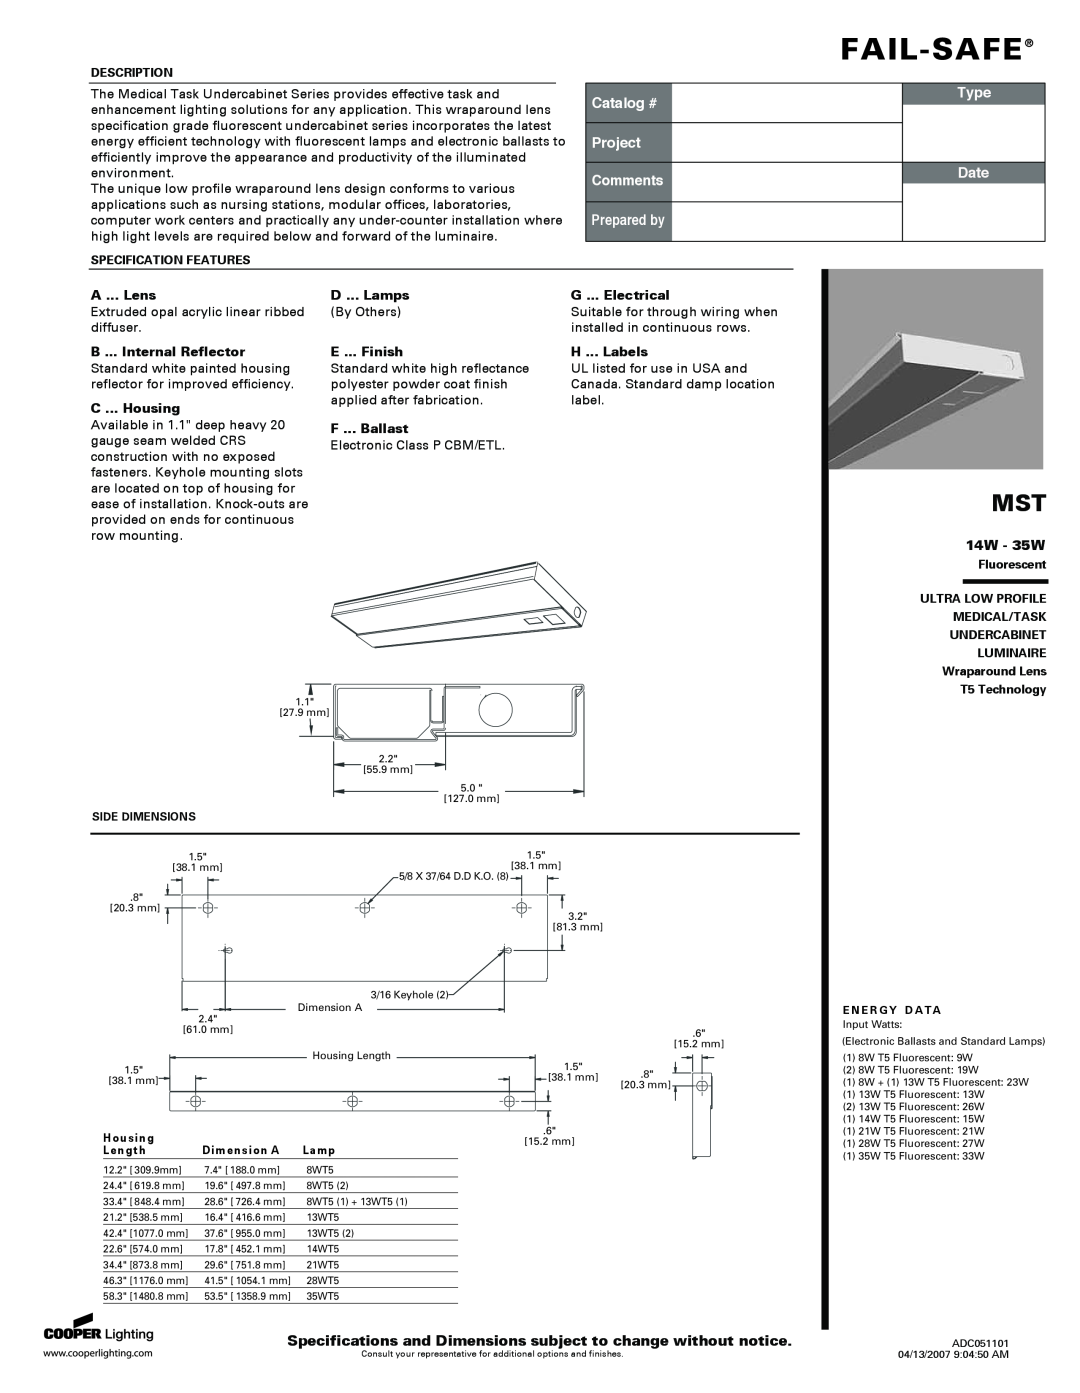 Cooper Lighting MST specifications 14W - 35W, Fail-Safe, Catalog #, Project Comments, Prepared by, Type, Date, A ... Lens 